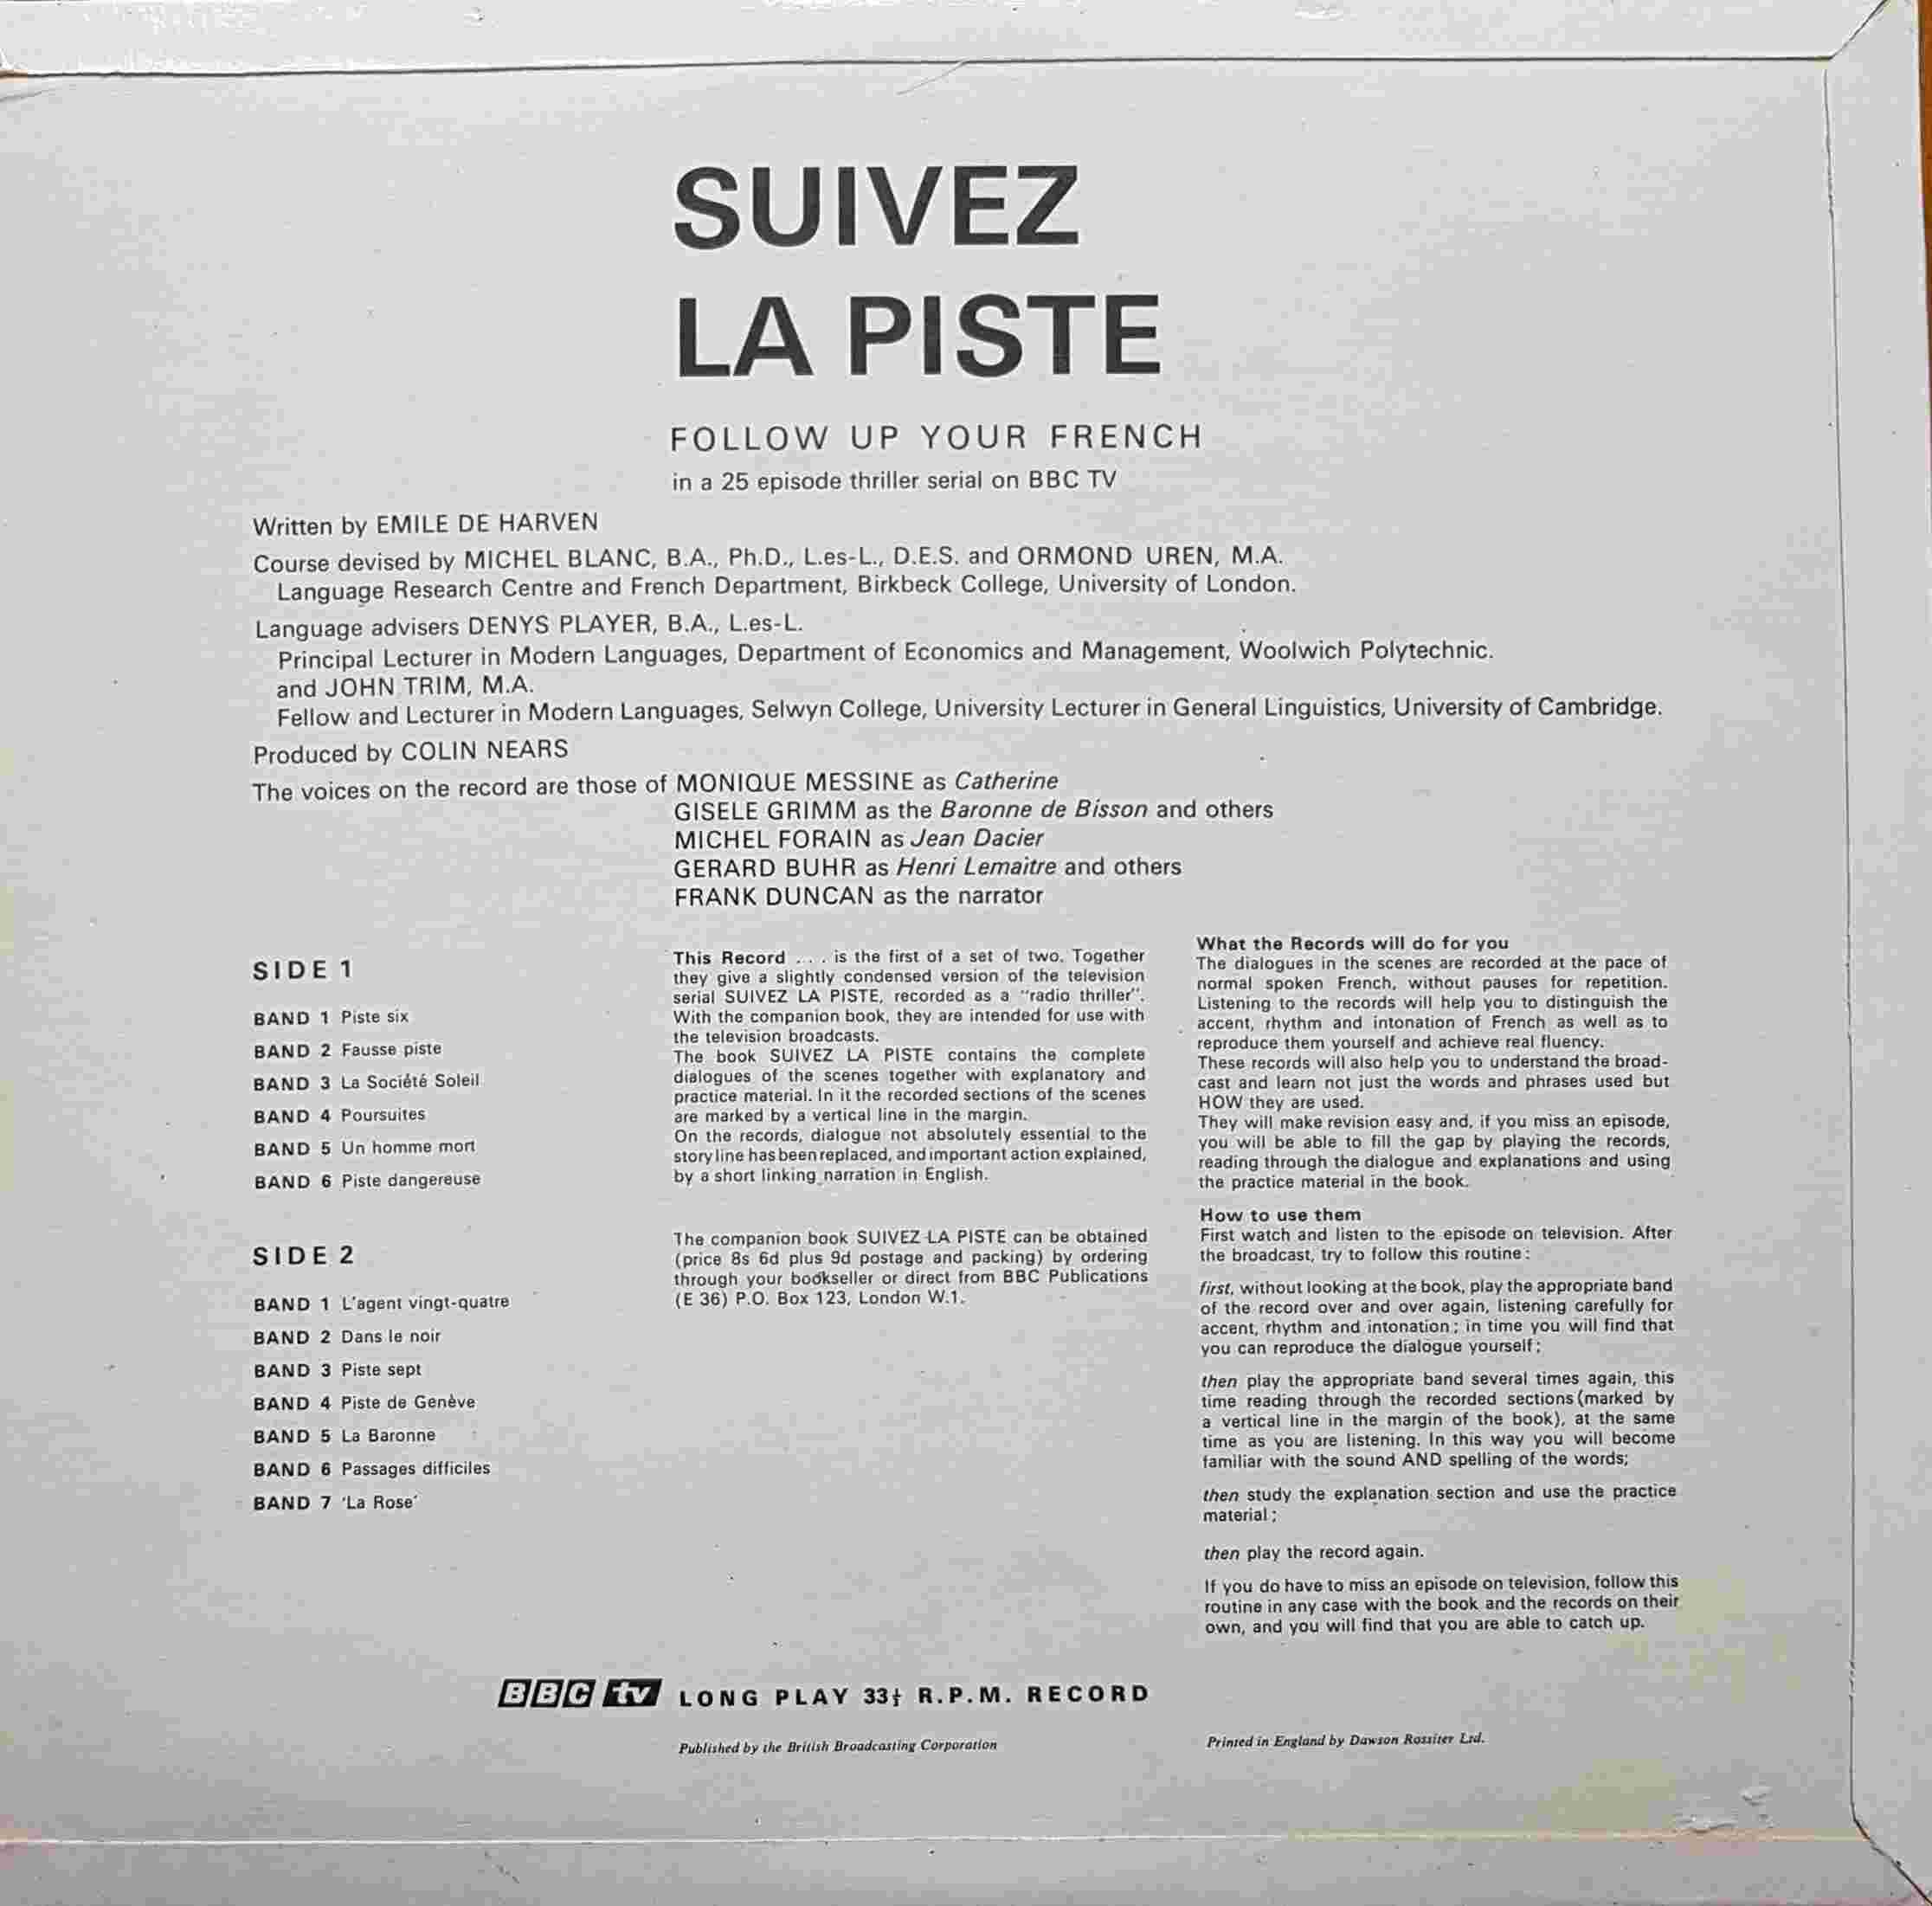 Picture of OP 47/48 Suivez la piste - Follow up your French in a 25 episode thriller serial on BBC tv - Episodes 1 - 13 by artist Emile De Harven / Michel Blanc / Denys Player / John Trim from the BBC records and Tapes library